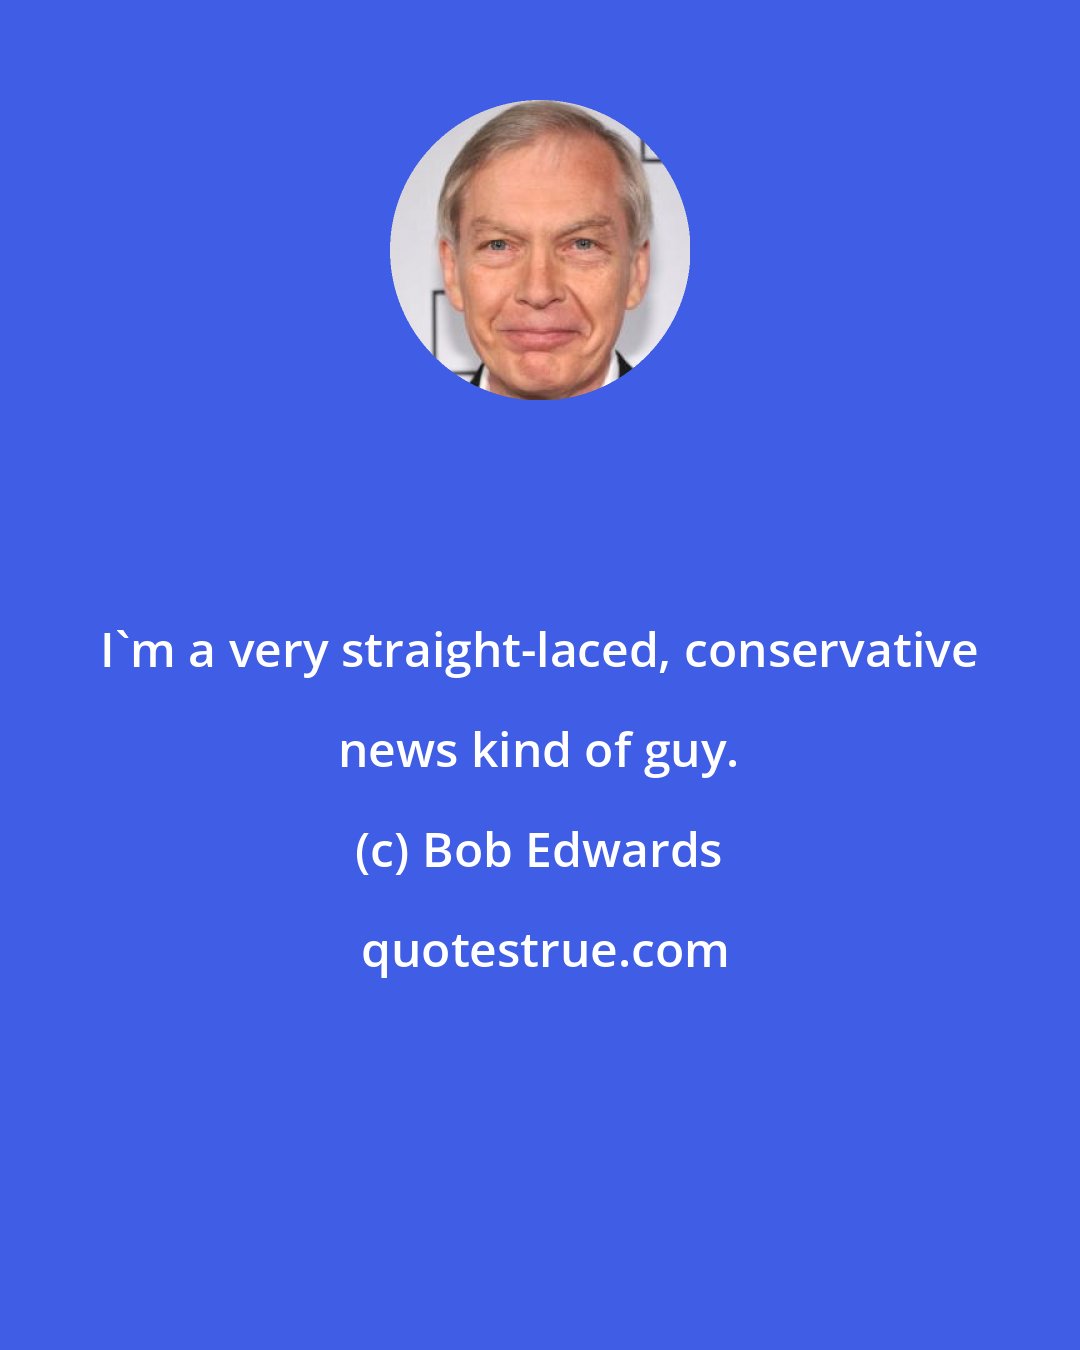 Bob Edwards: I'm a very straight-laced, conservative news kind of guy.